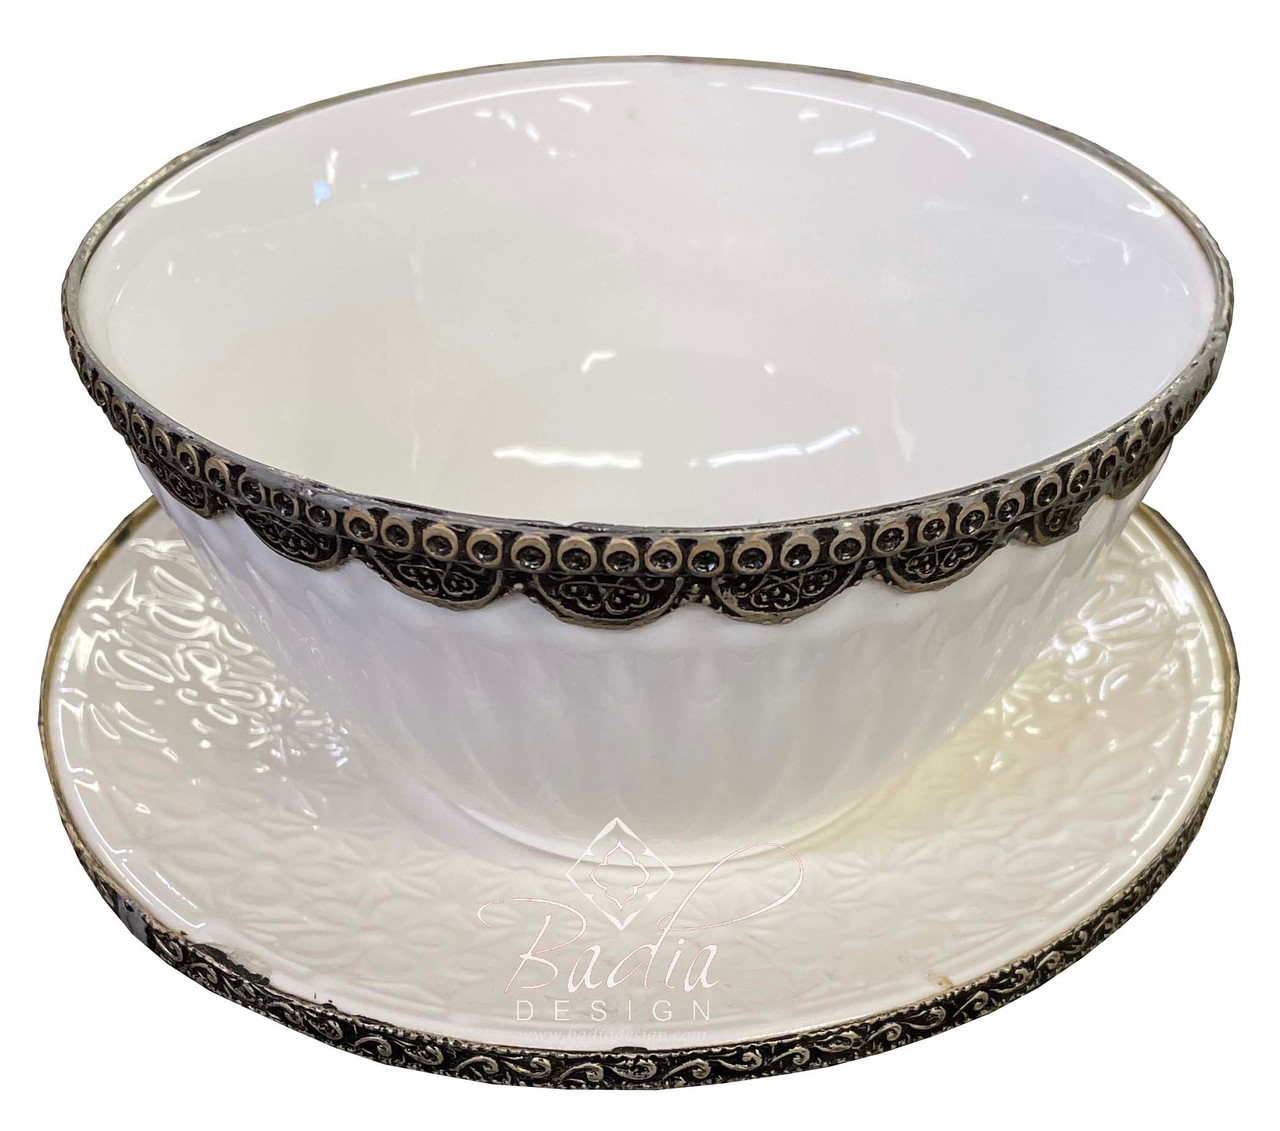 Small White Ceramic Bowl and Saucer with Silver Metal Rim - CER-B021